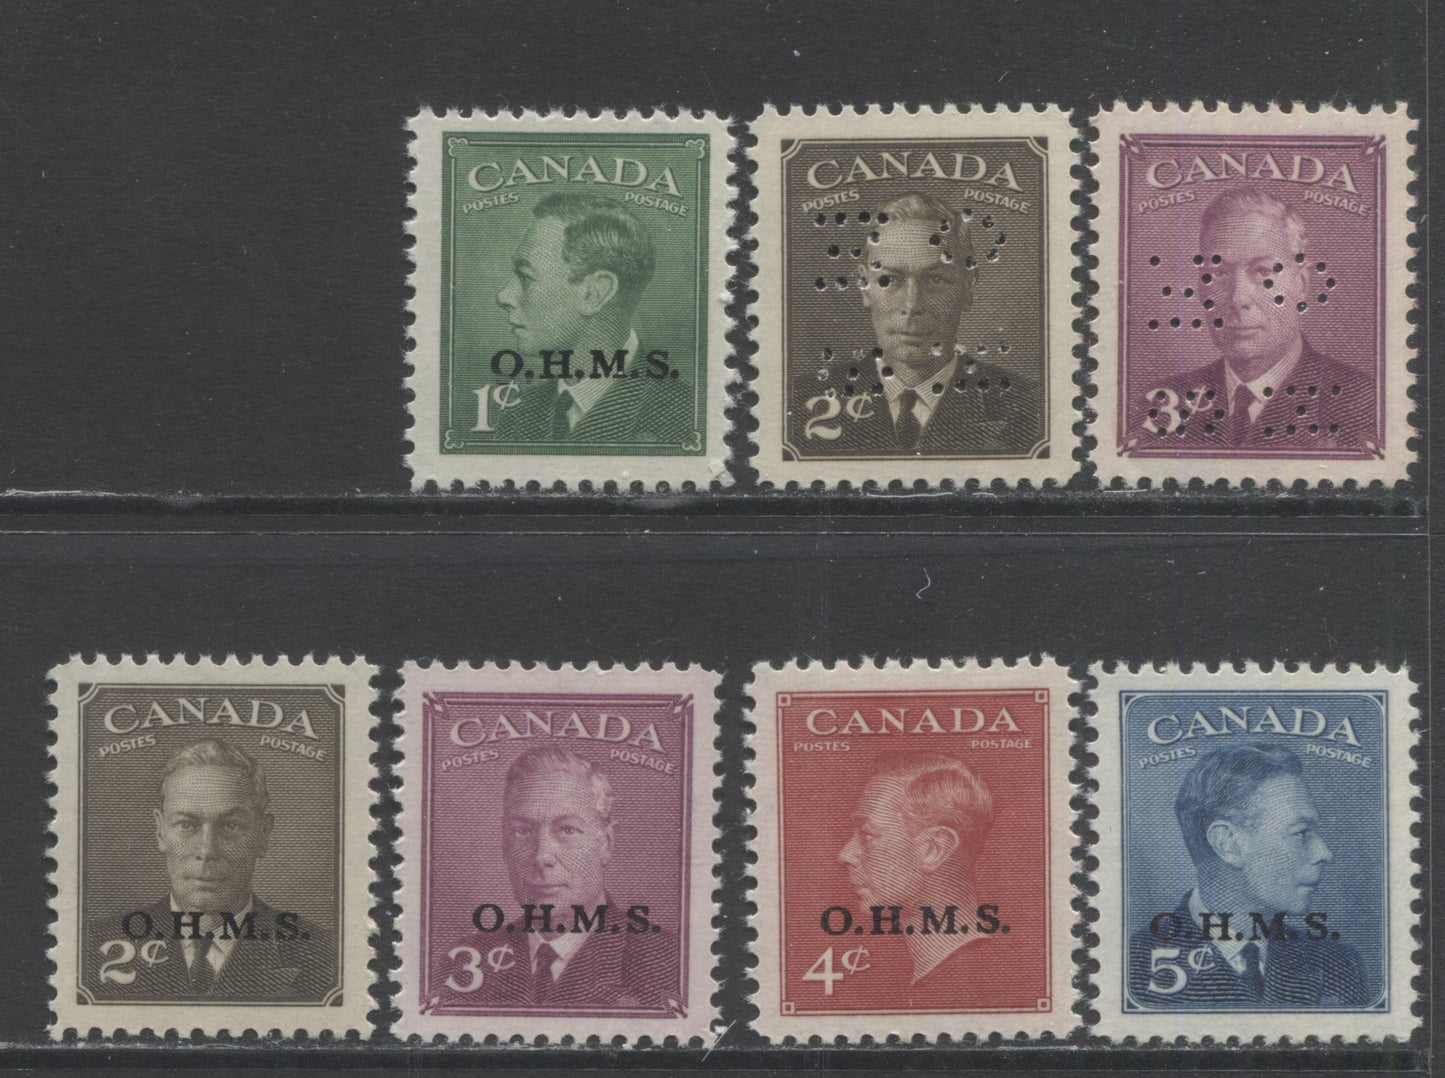 Lot 305 Canada #O10-285 - O10-286, O12-O15A 1c -5c Green - Deep Blue King George VI, 1950 OHMS Overprint & 4 Hole OHMS Perfin Postes-Postage Issue, 7 Fine NH and VFNH Singles